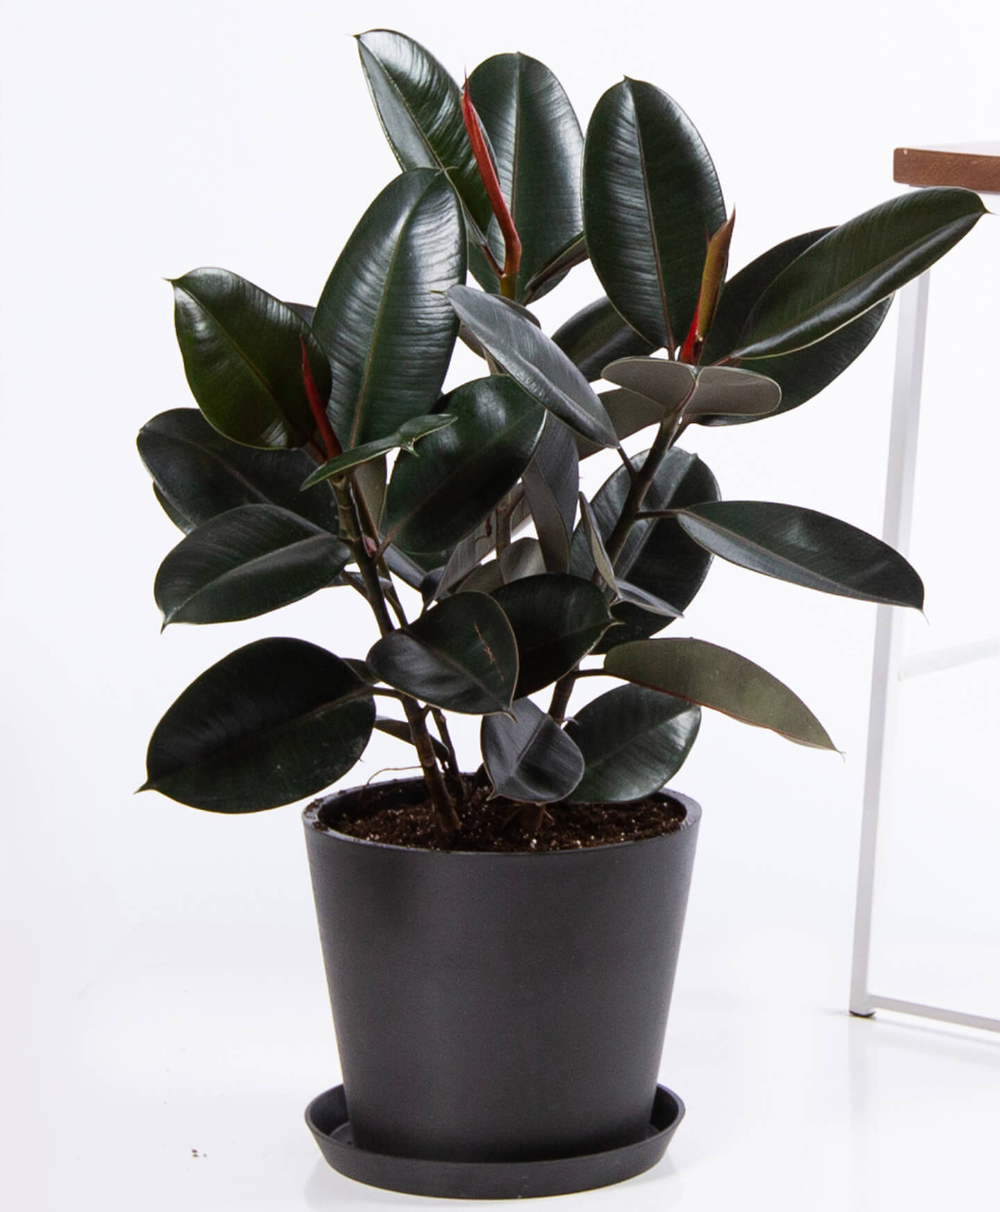 Buy Potted Burgundy Rubber Tree Indoor Plant | Bloomscape -   25 plants Decoration rubber tree ideas